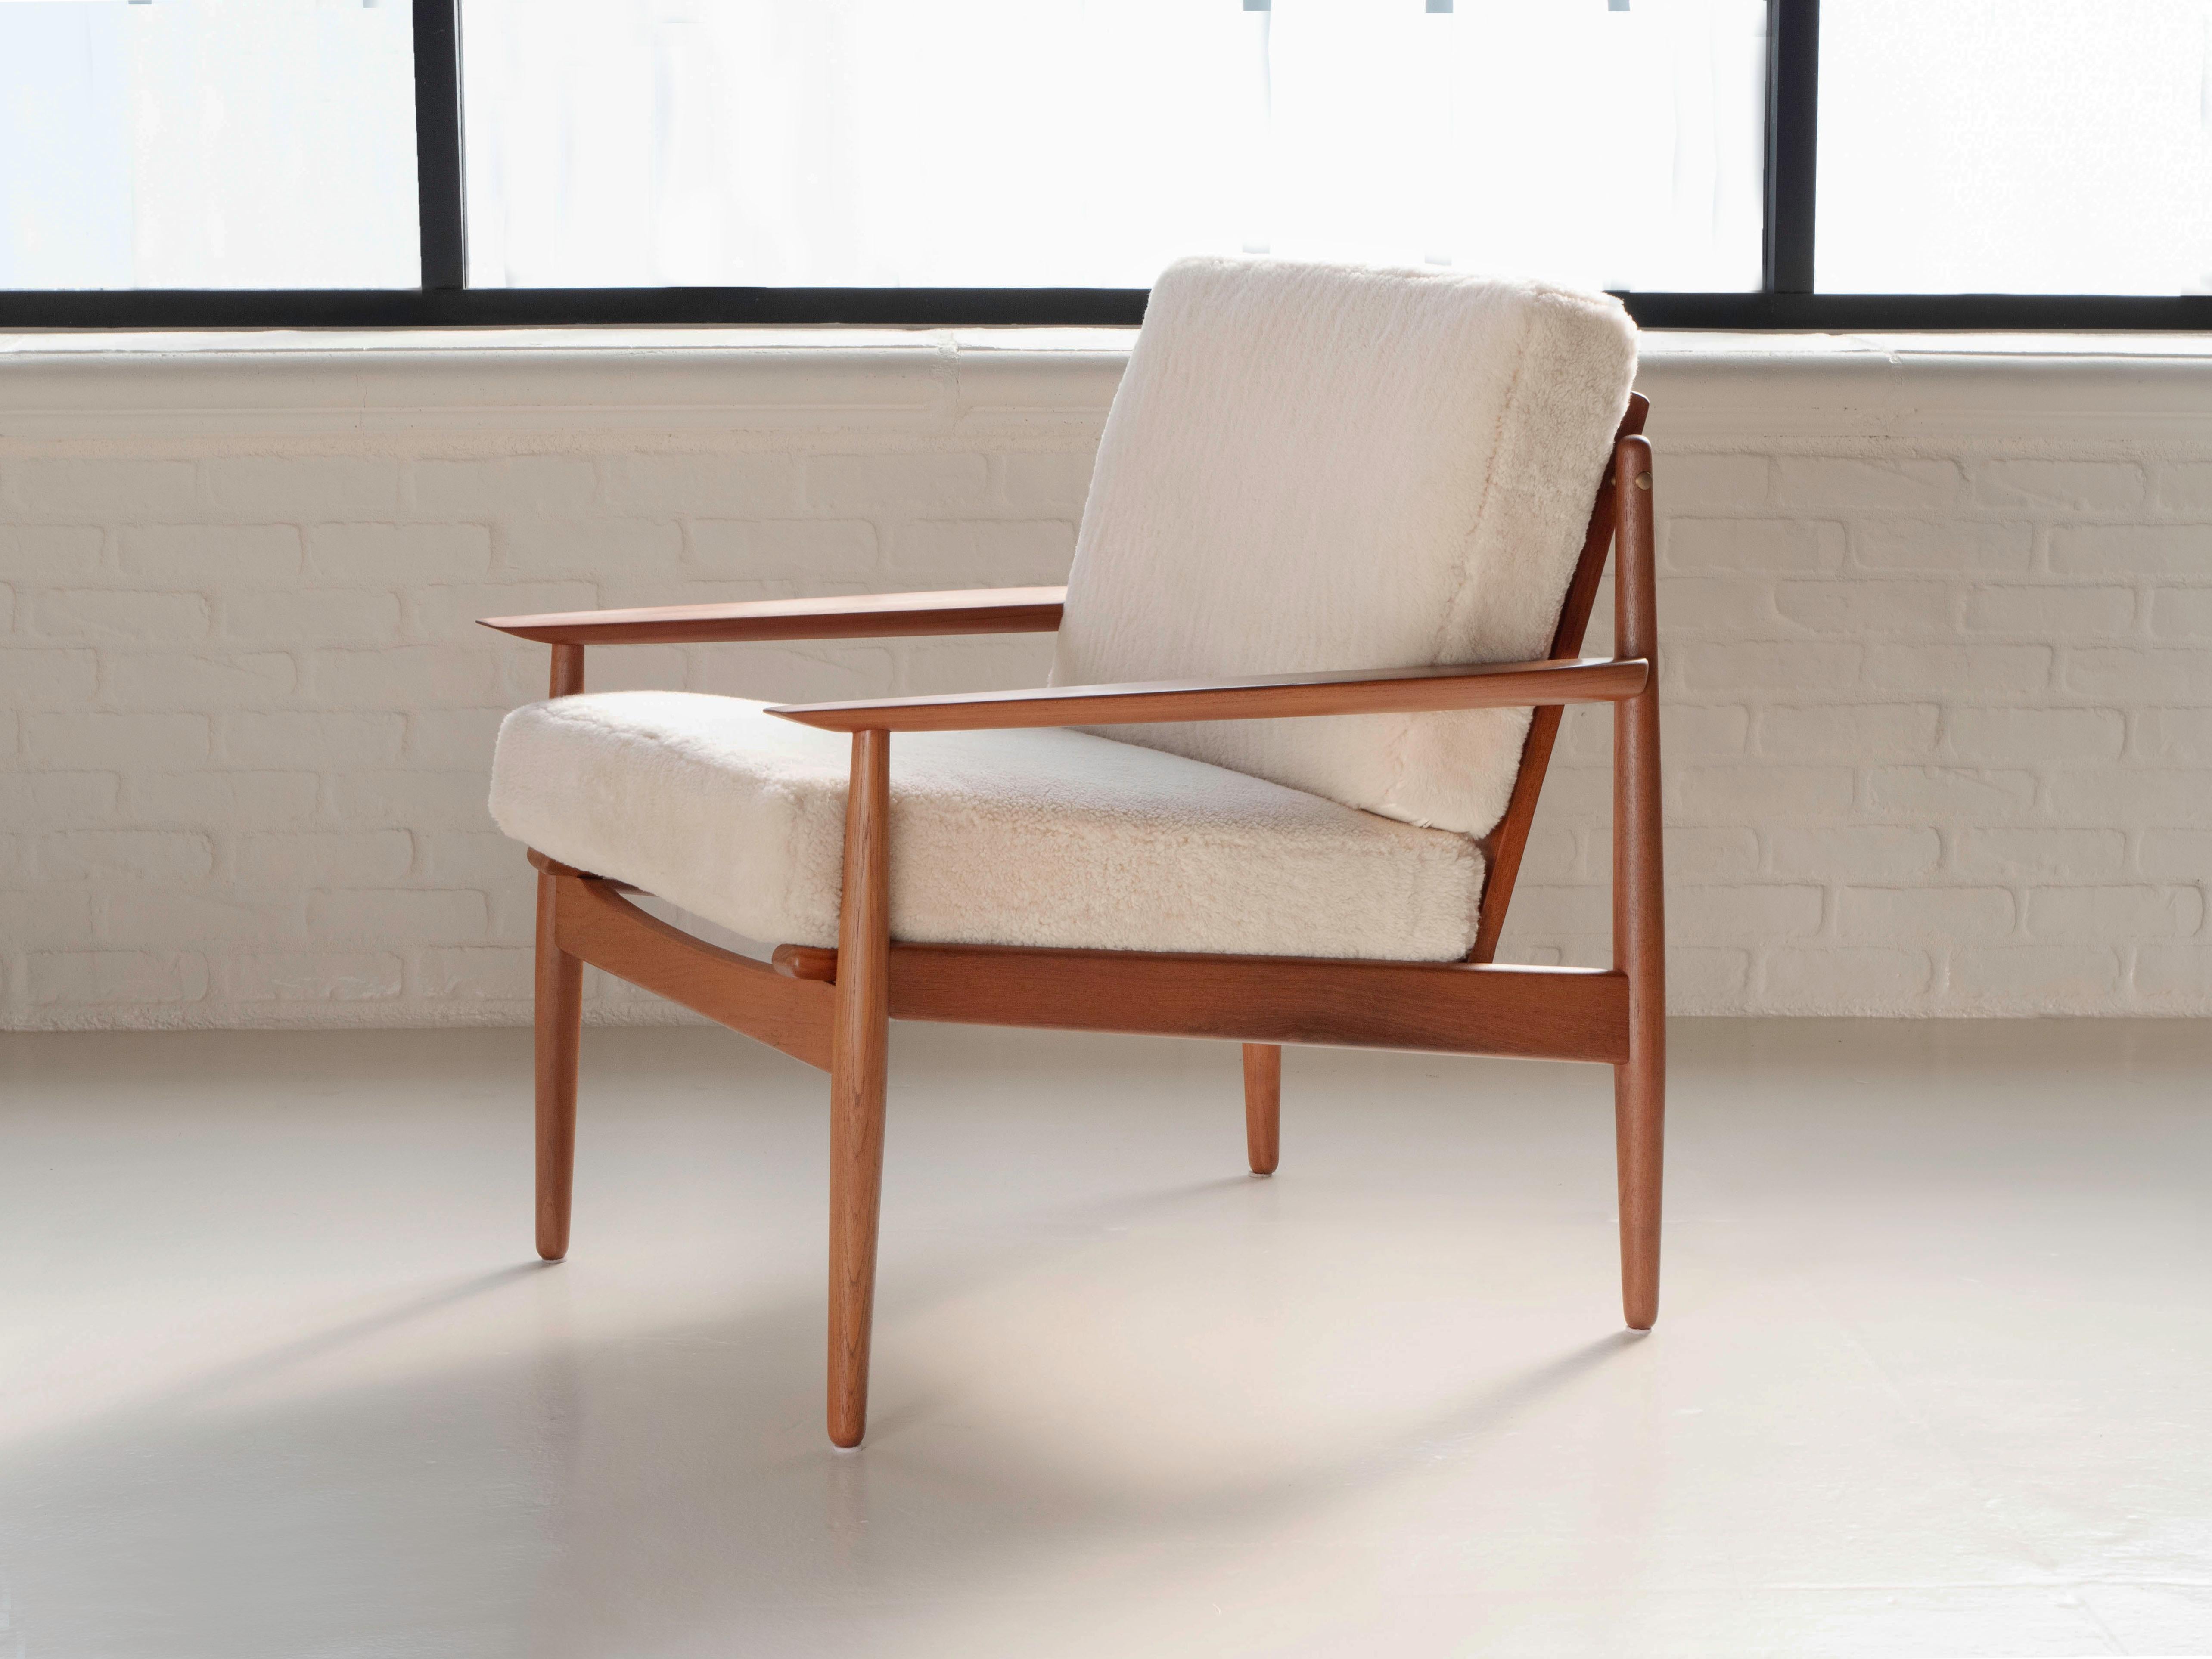 Svend Age Eriksen for Glostrup Møbelfabrik. Made in Denmark circa 1960's. The solid teak chair frame has been refinished and is in excellent condition. The upholstery was redone with genuine shearling, new foam was also added. 


Chair